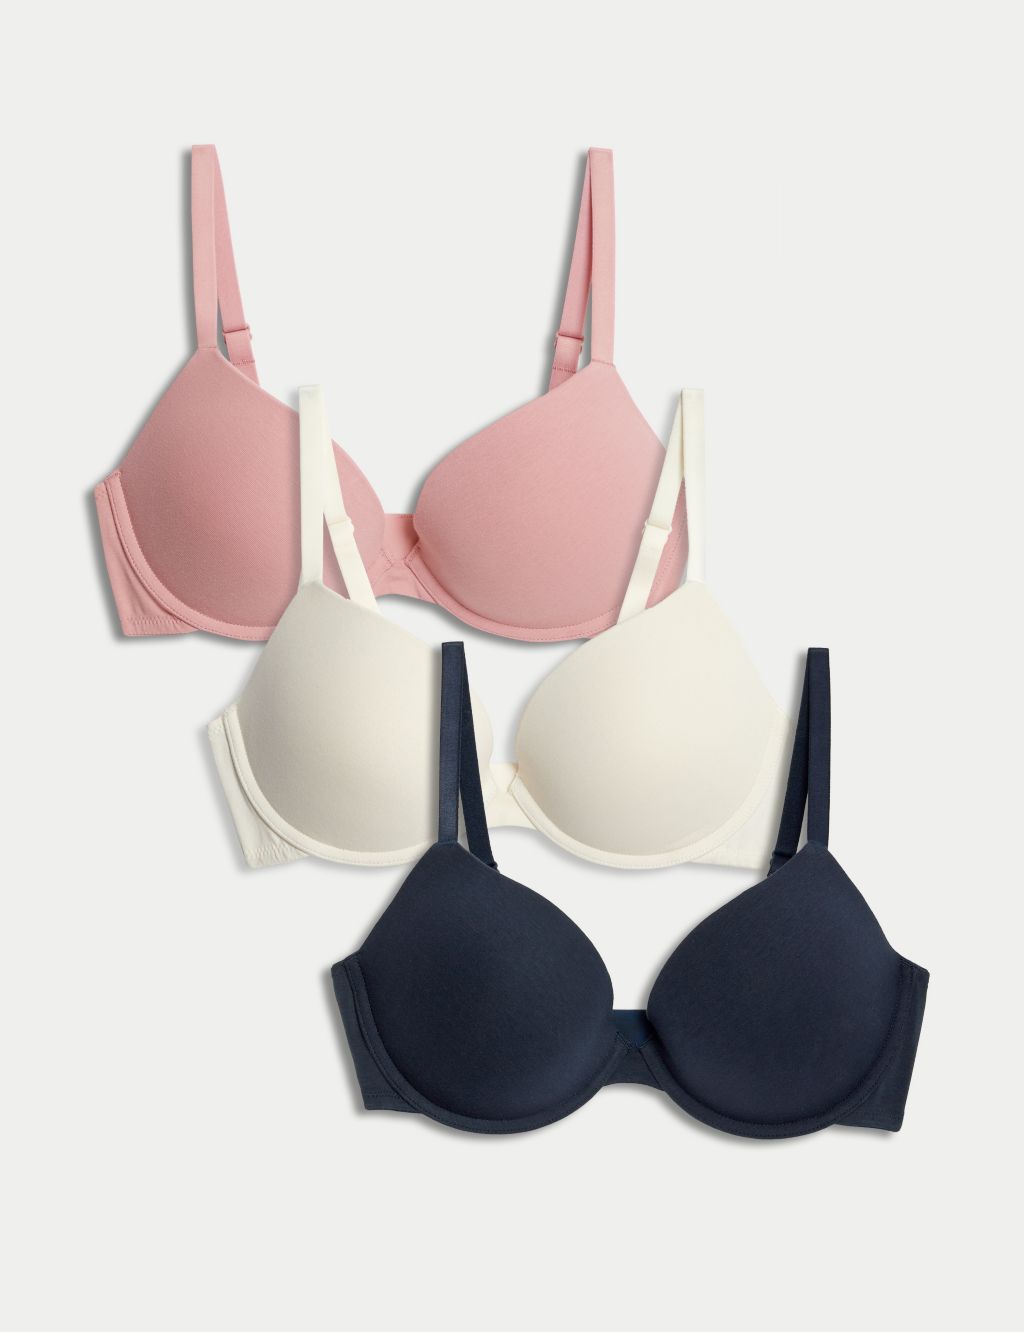 Push-up bras for teenagers?!?!?